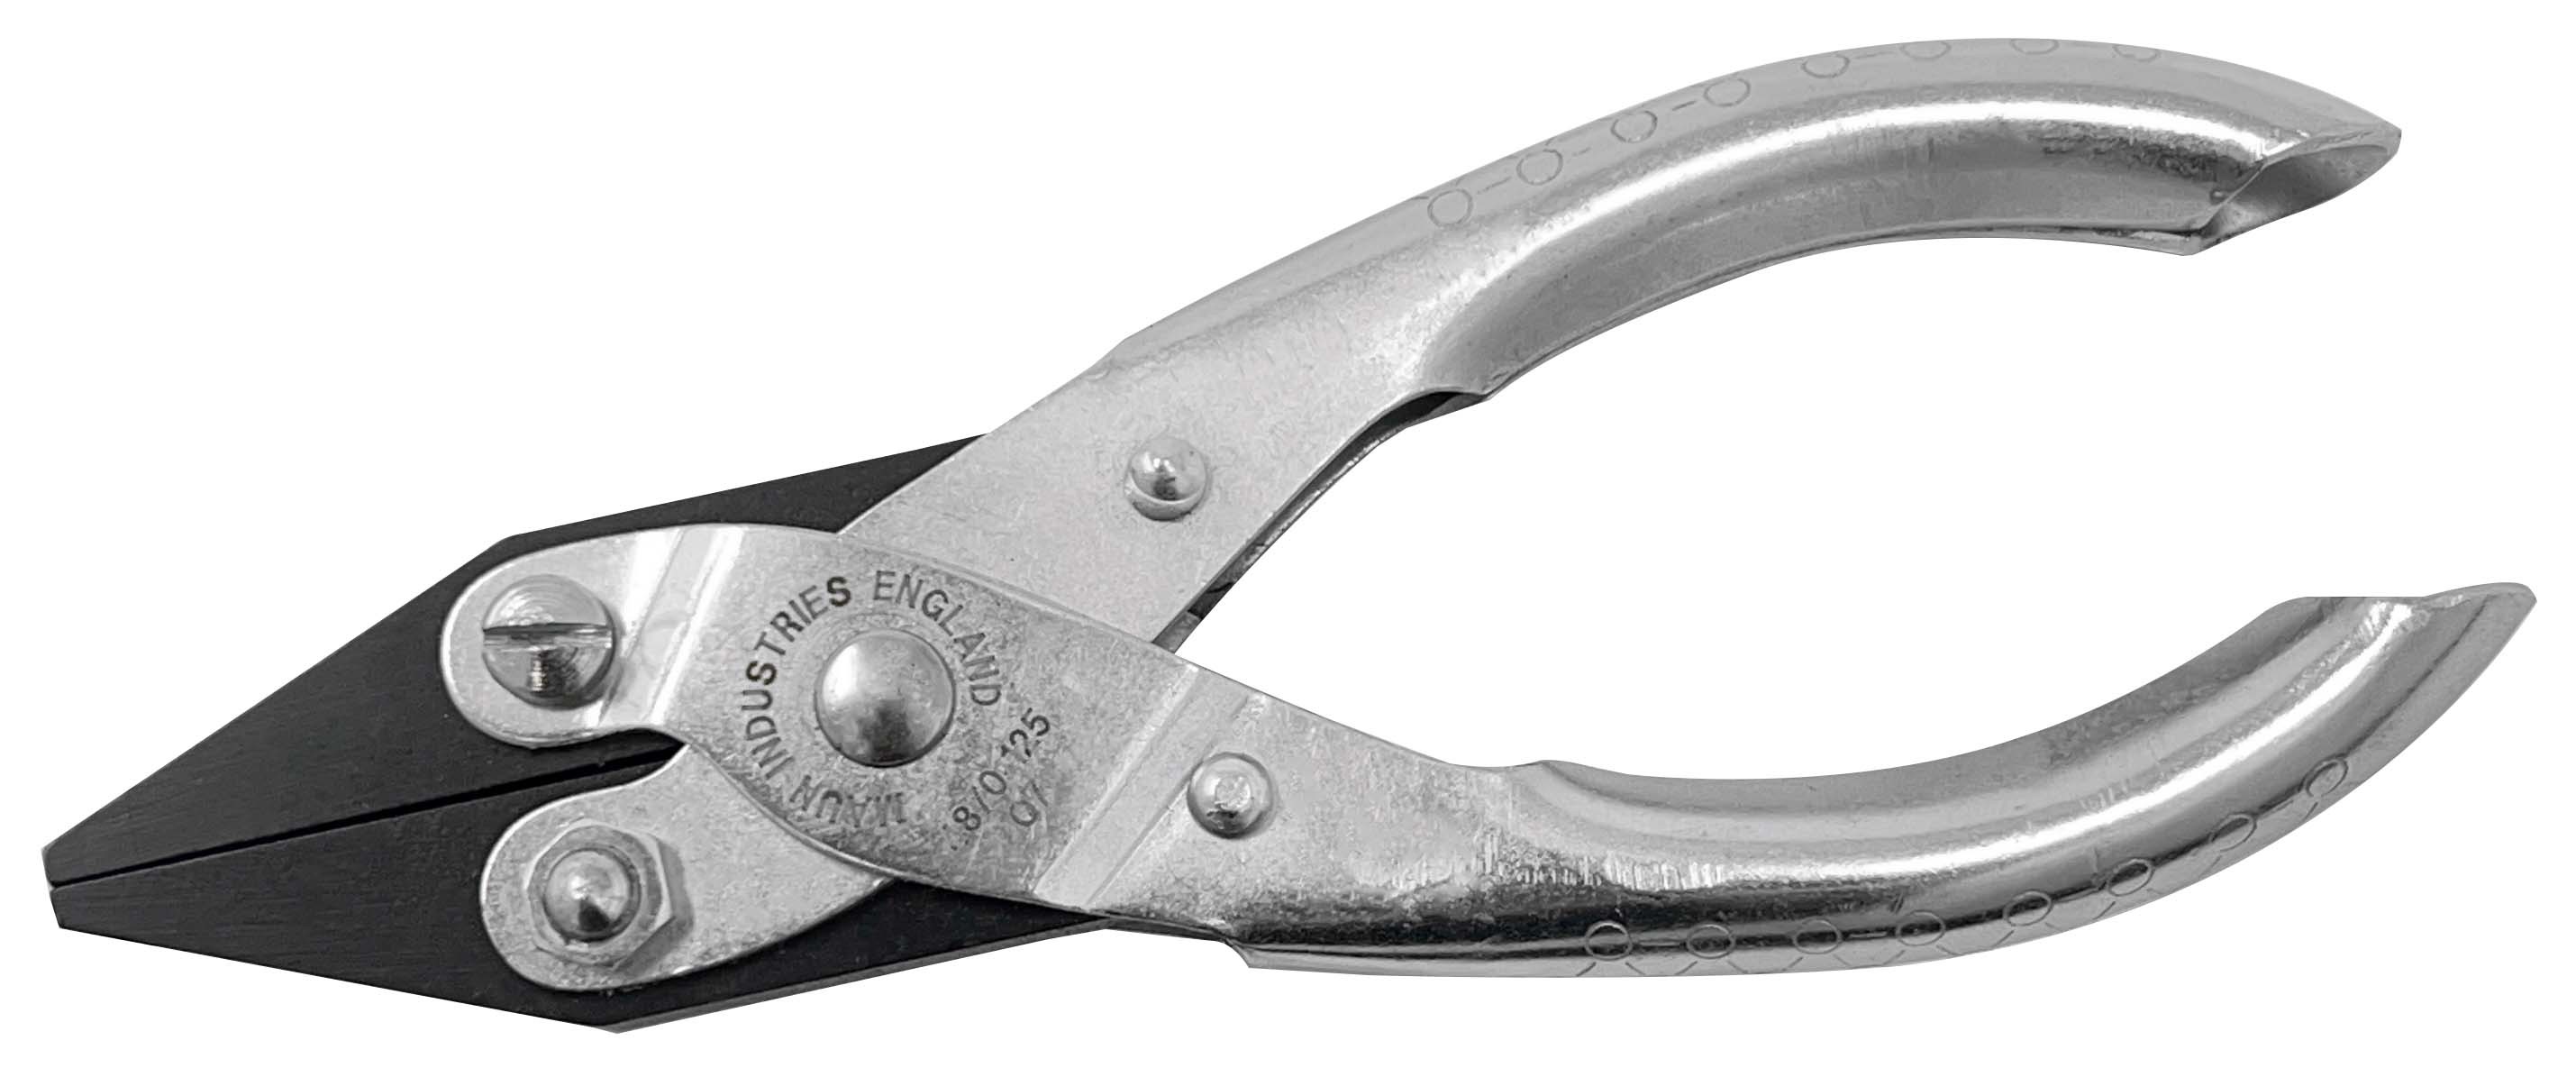 Aven 10761 5 in. Parallel Action Flat Nose Pliers with Cutter